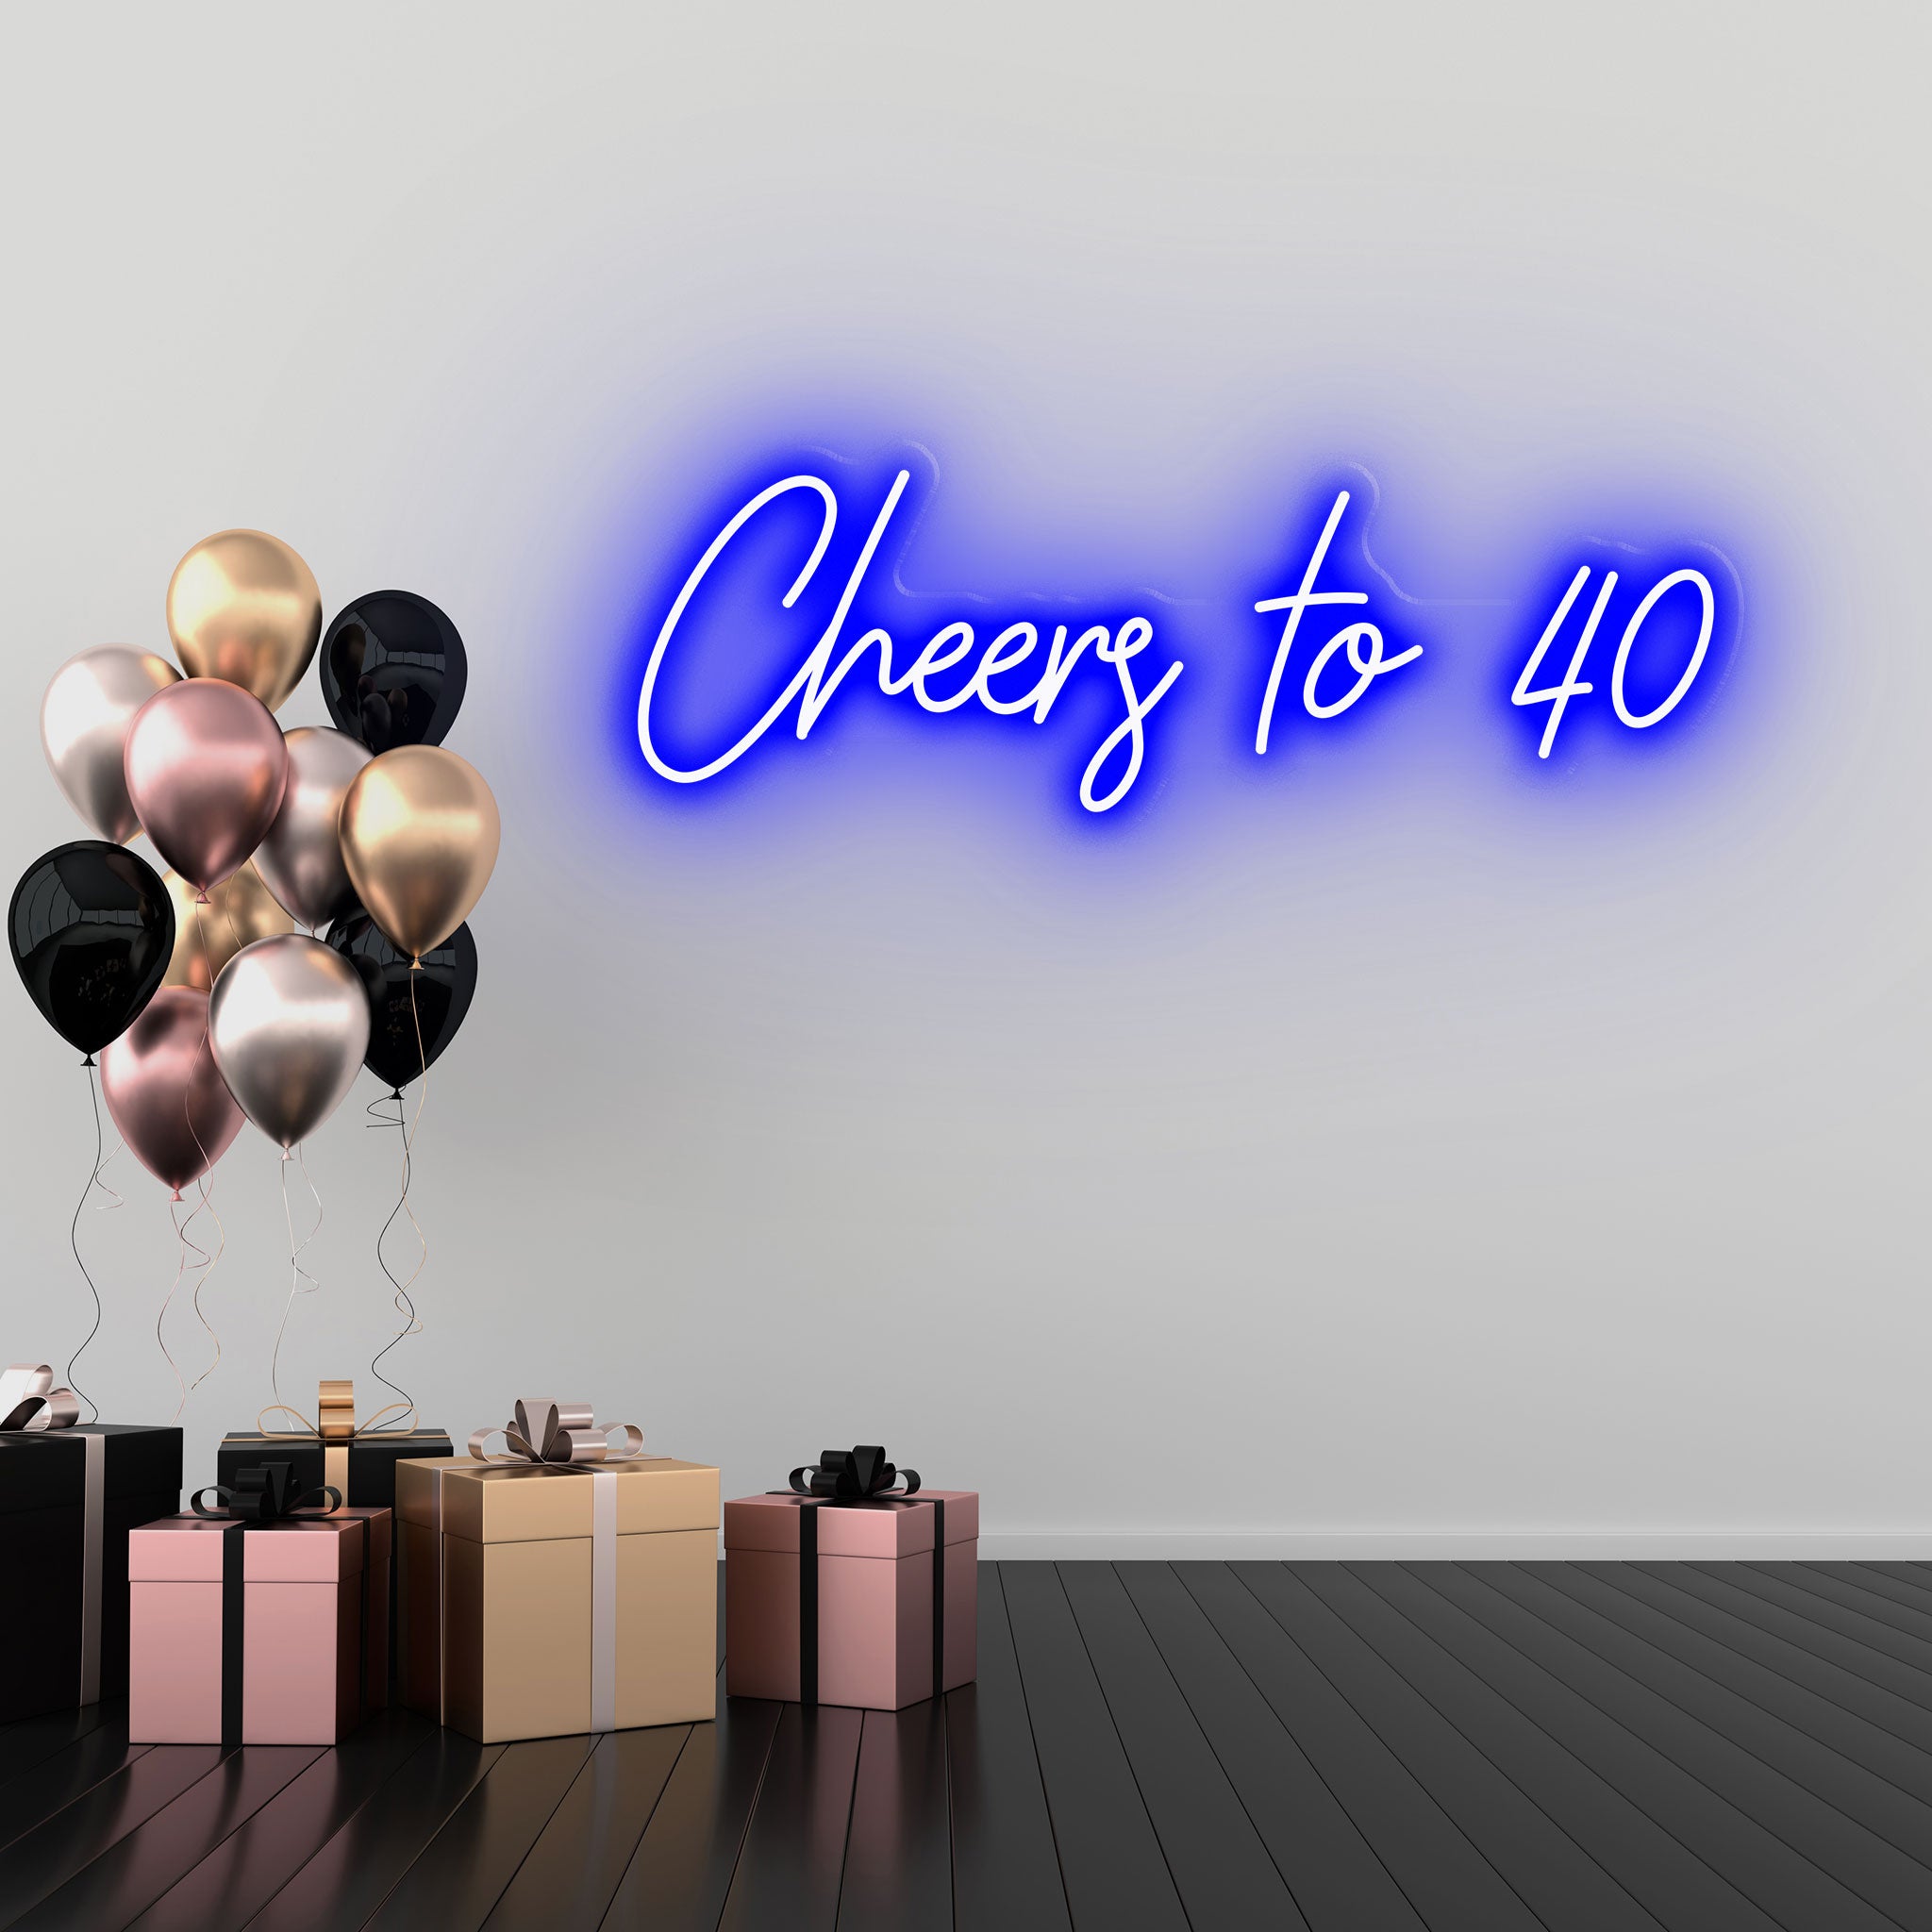 Cheers to 40 - Neon Sign - Birthday Party